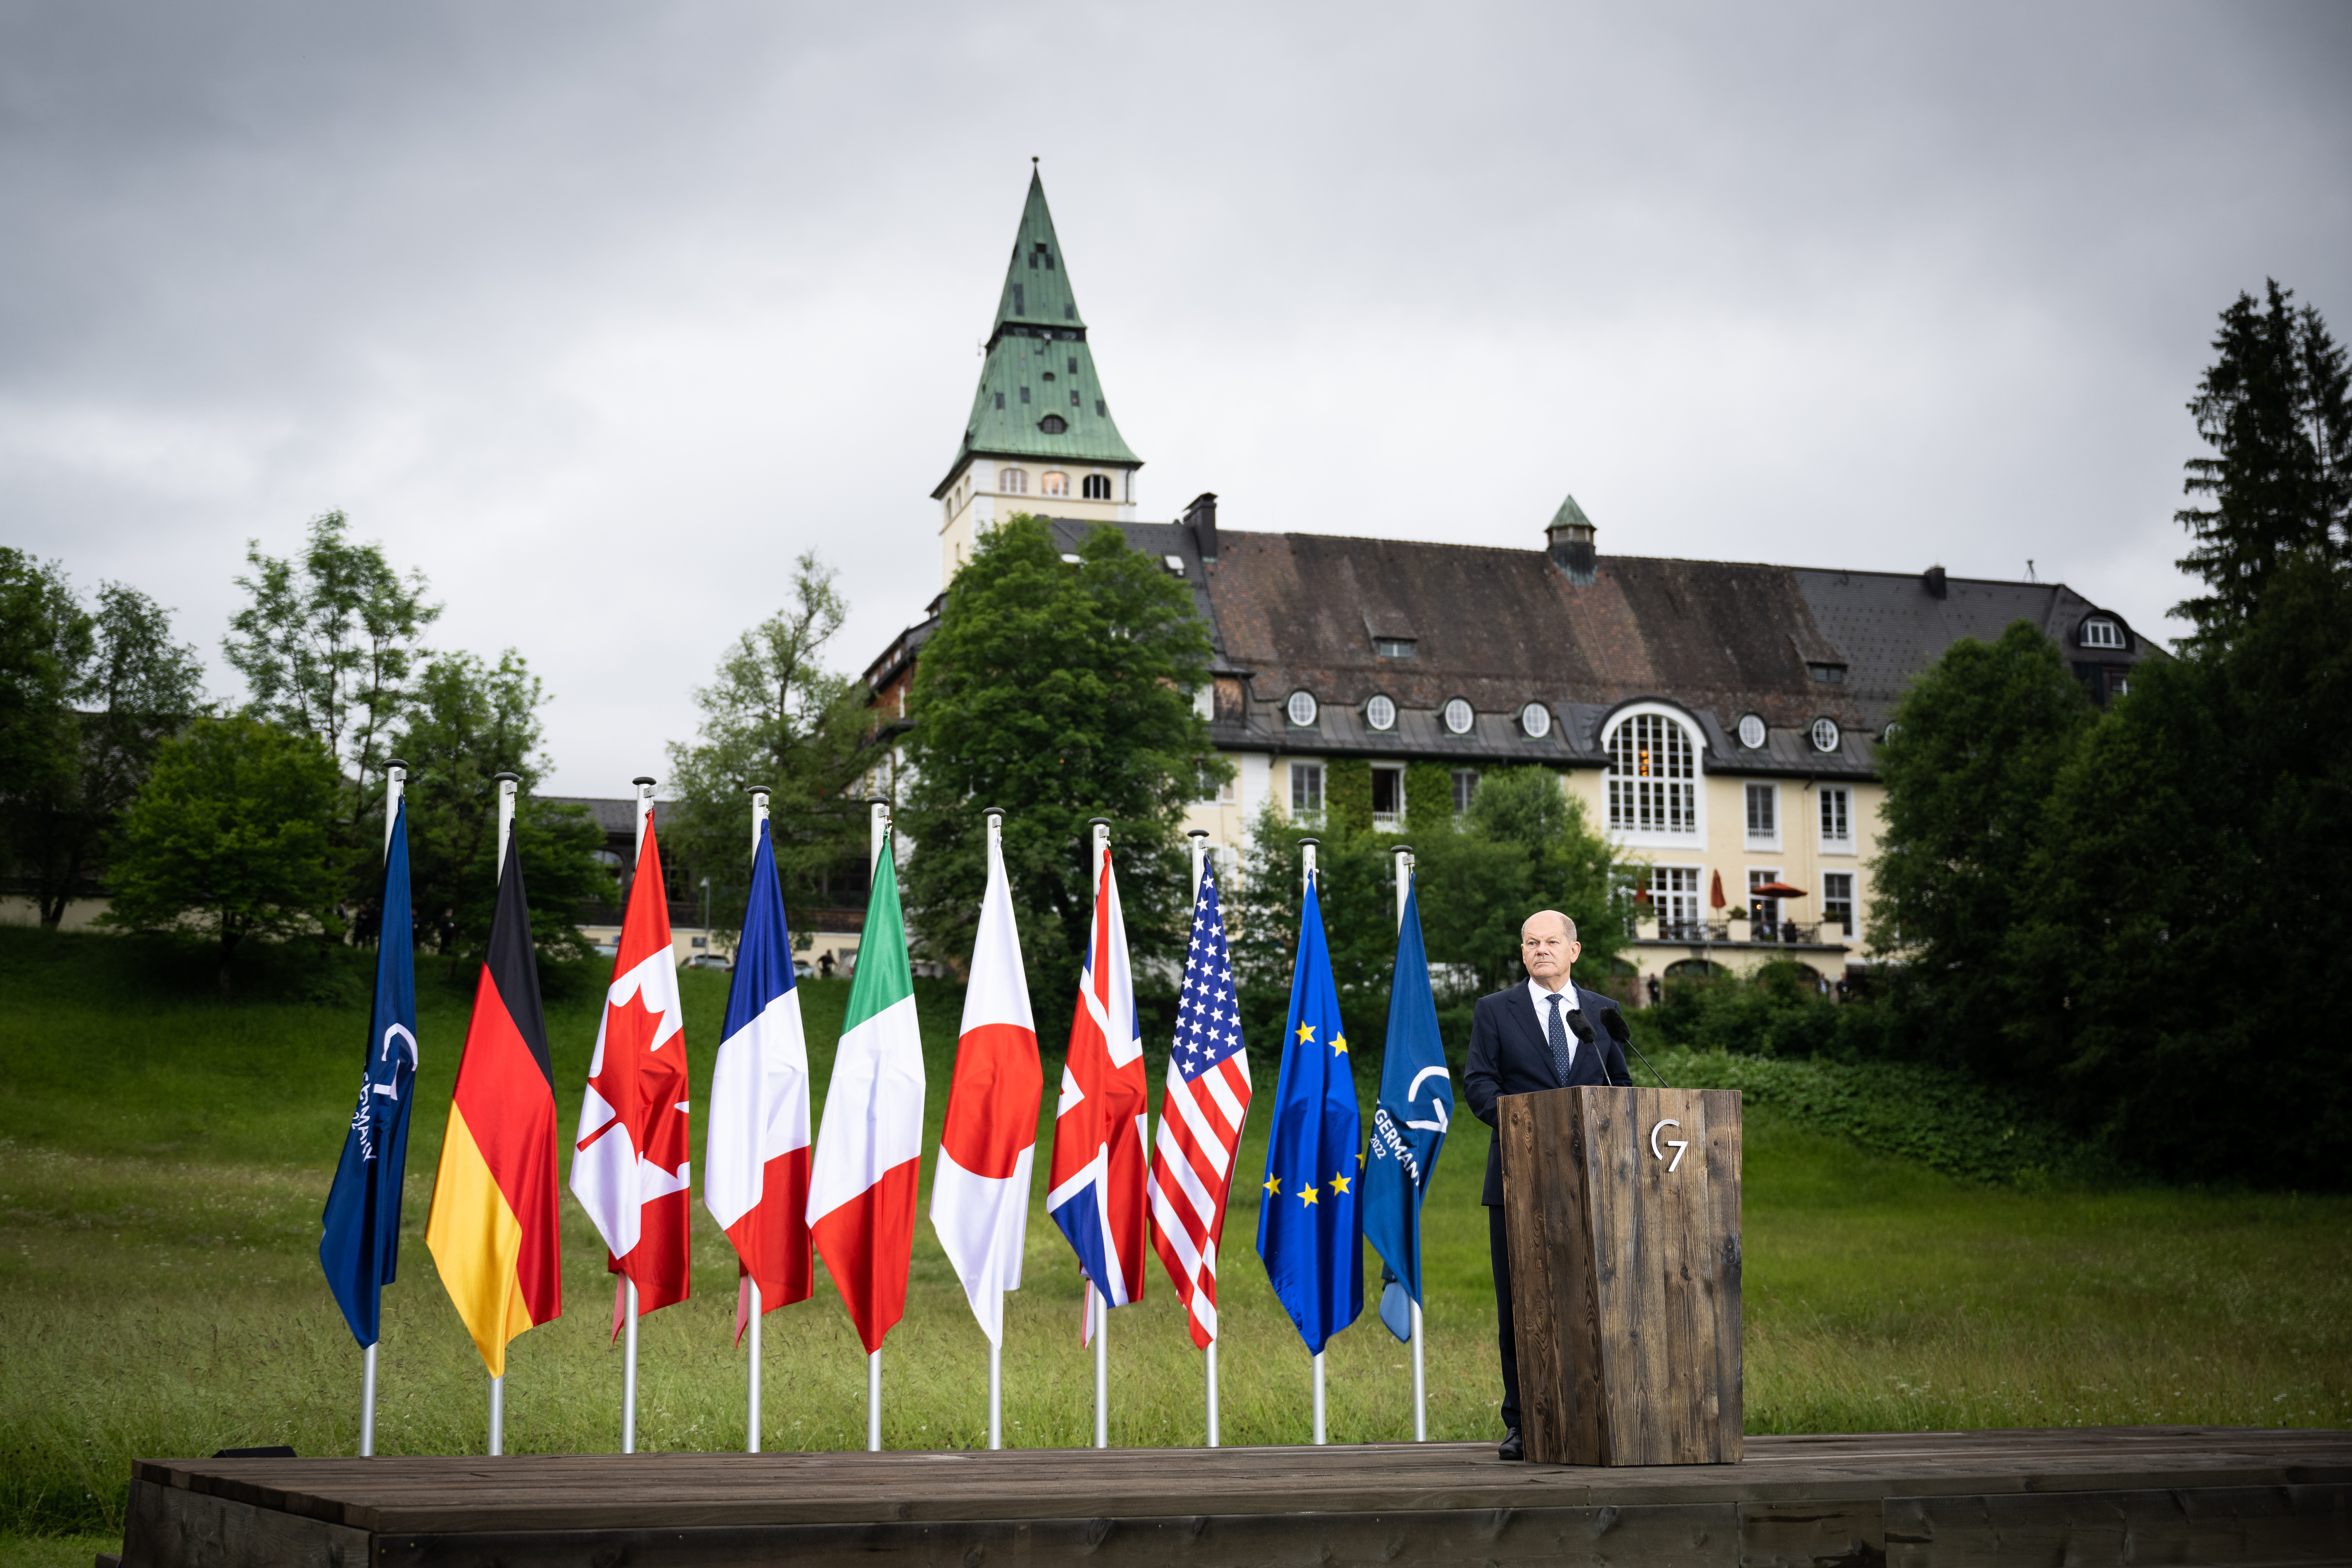 Federal Chancellor Olaf Scholz speaks to media representatives at the final press conference of the G7 summit.